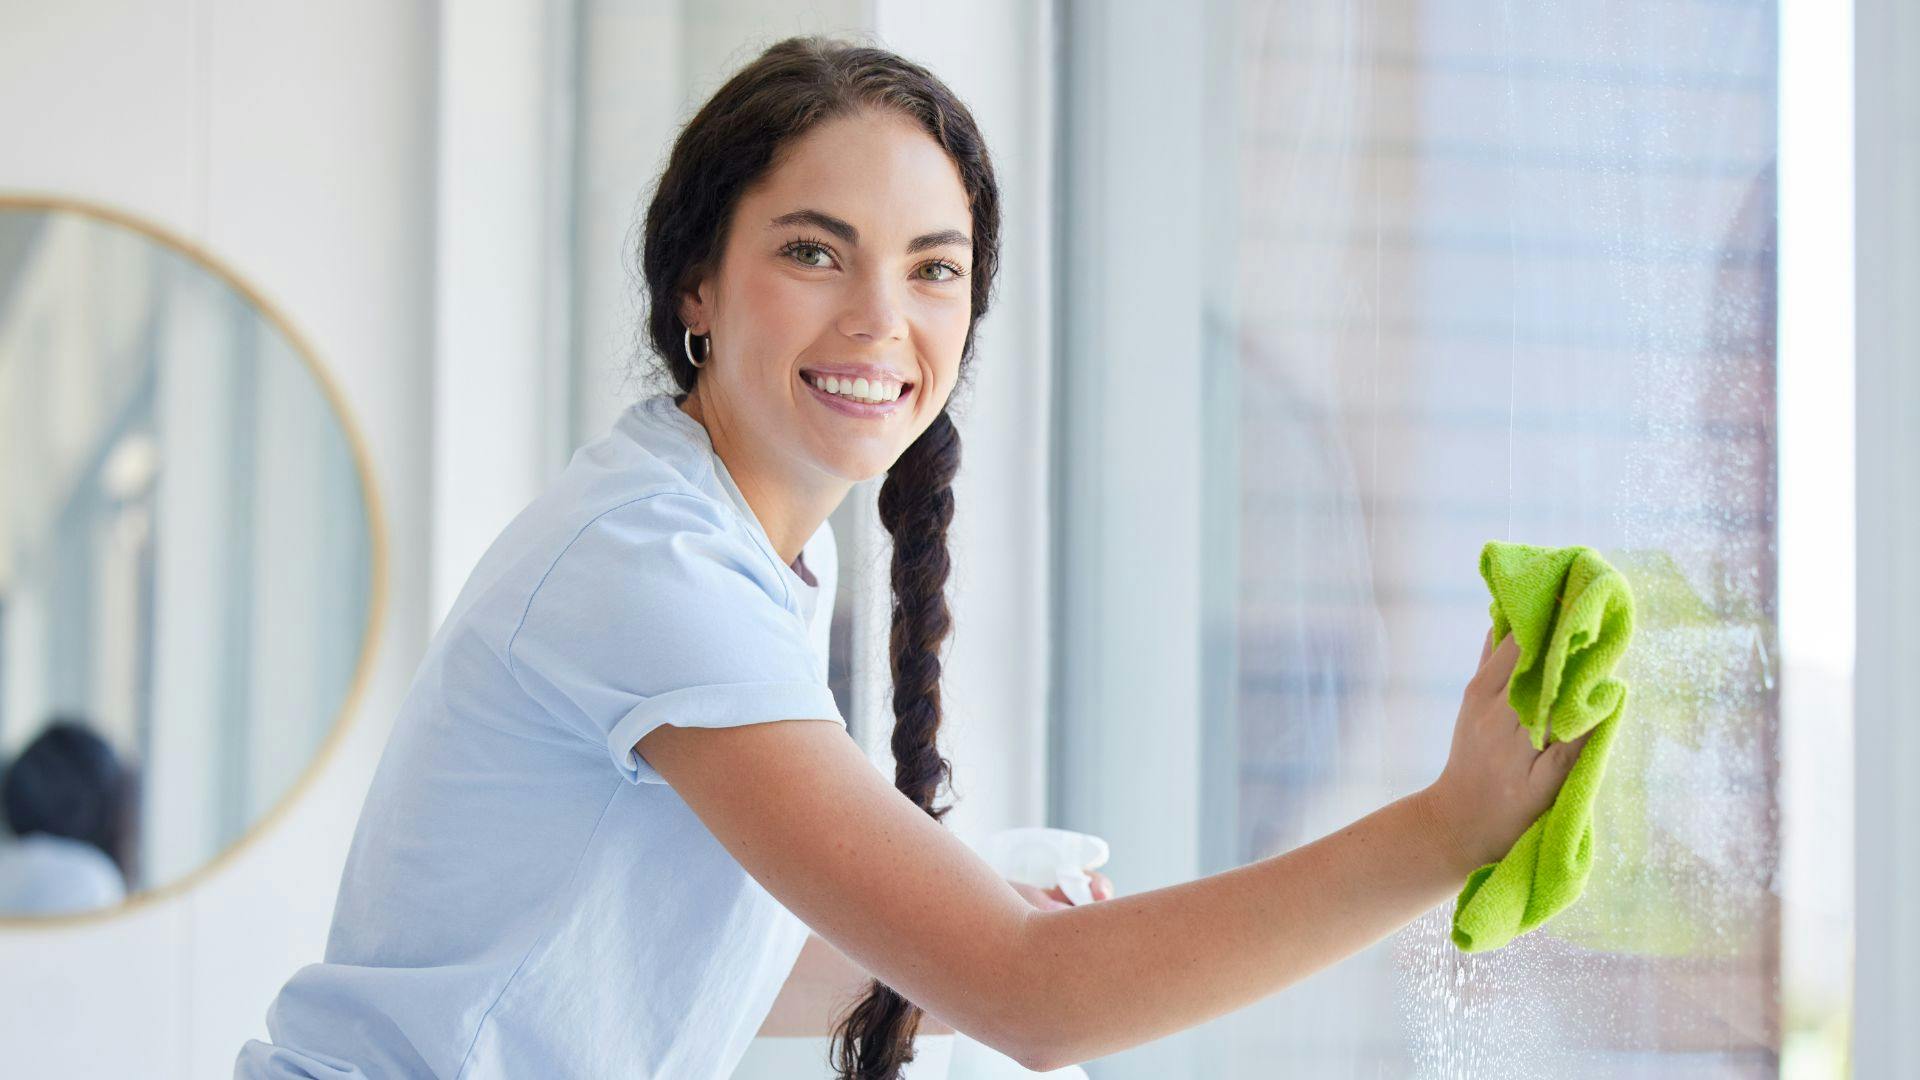 Professional window washer using a microfiber cloth to clean windows and smiling